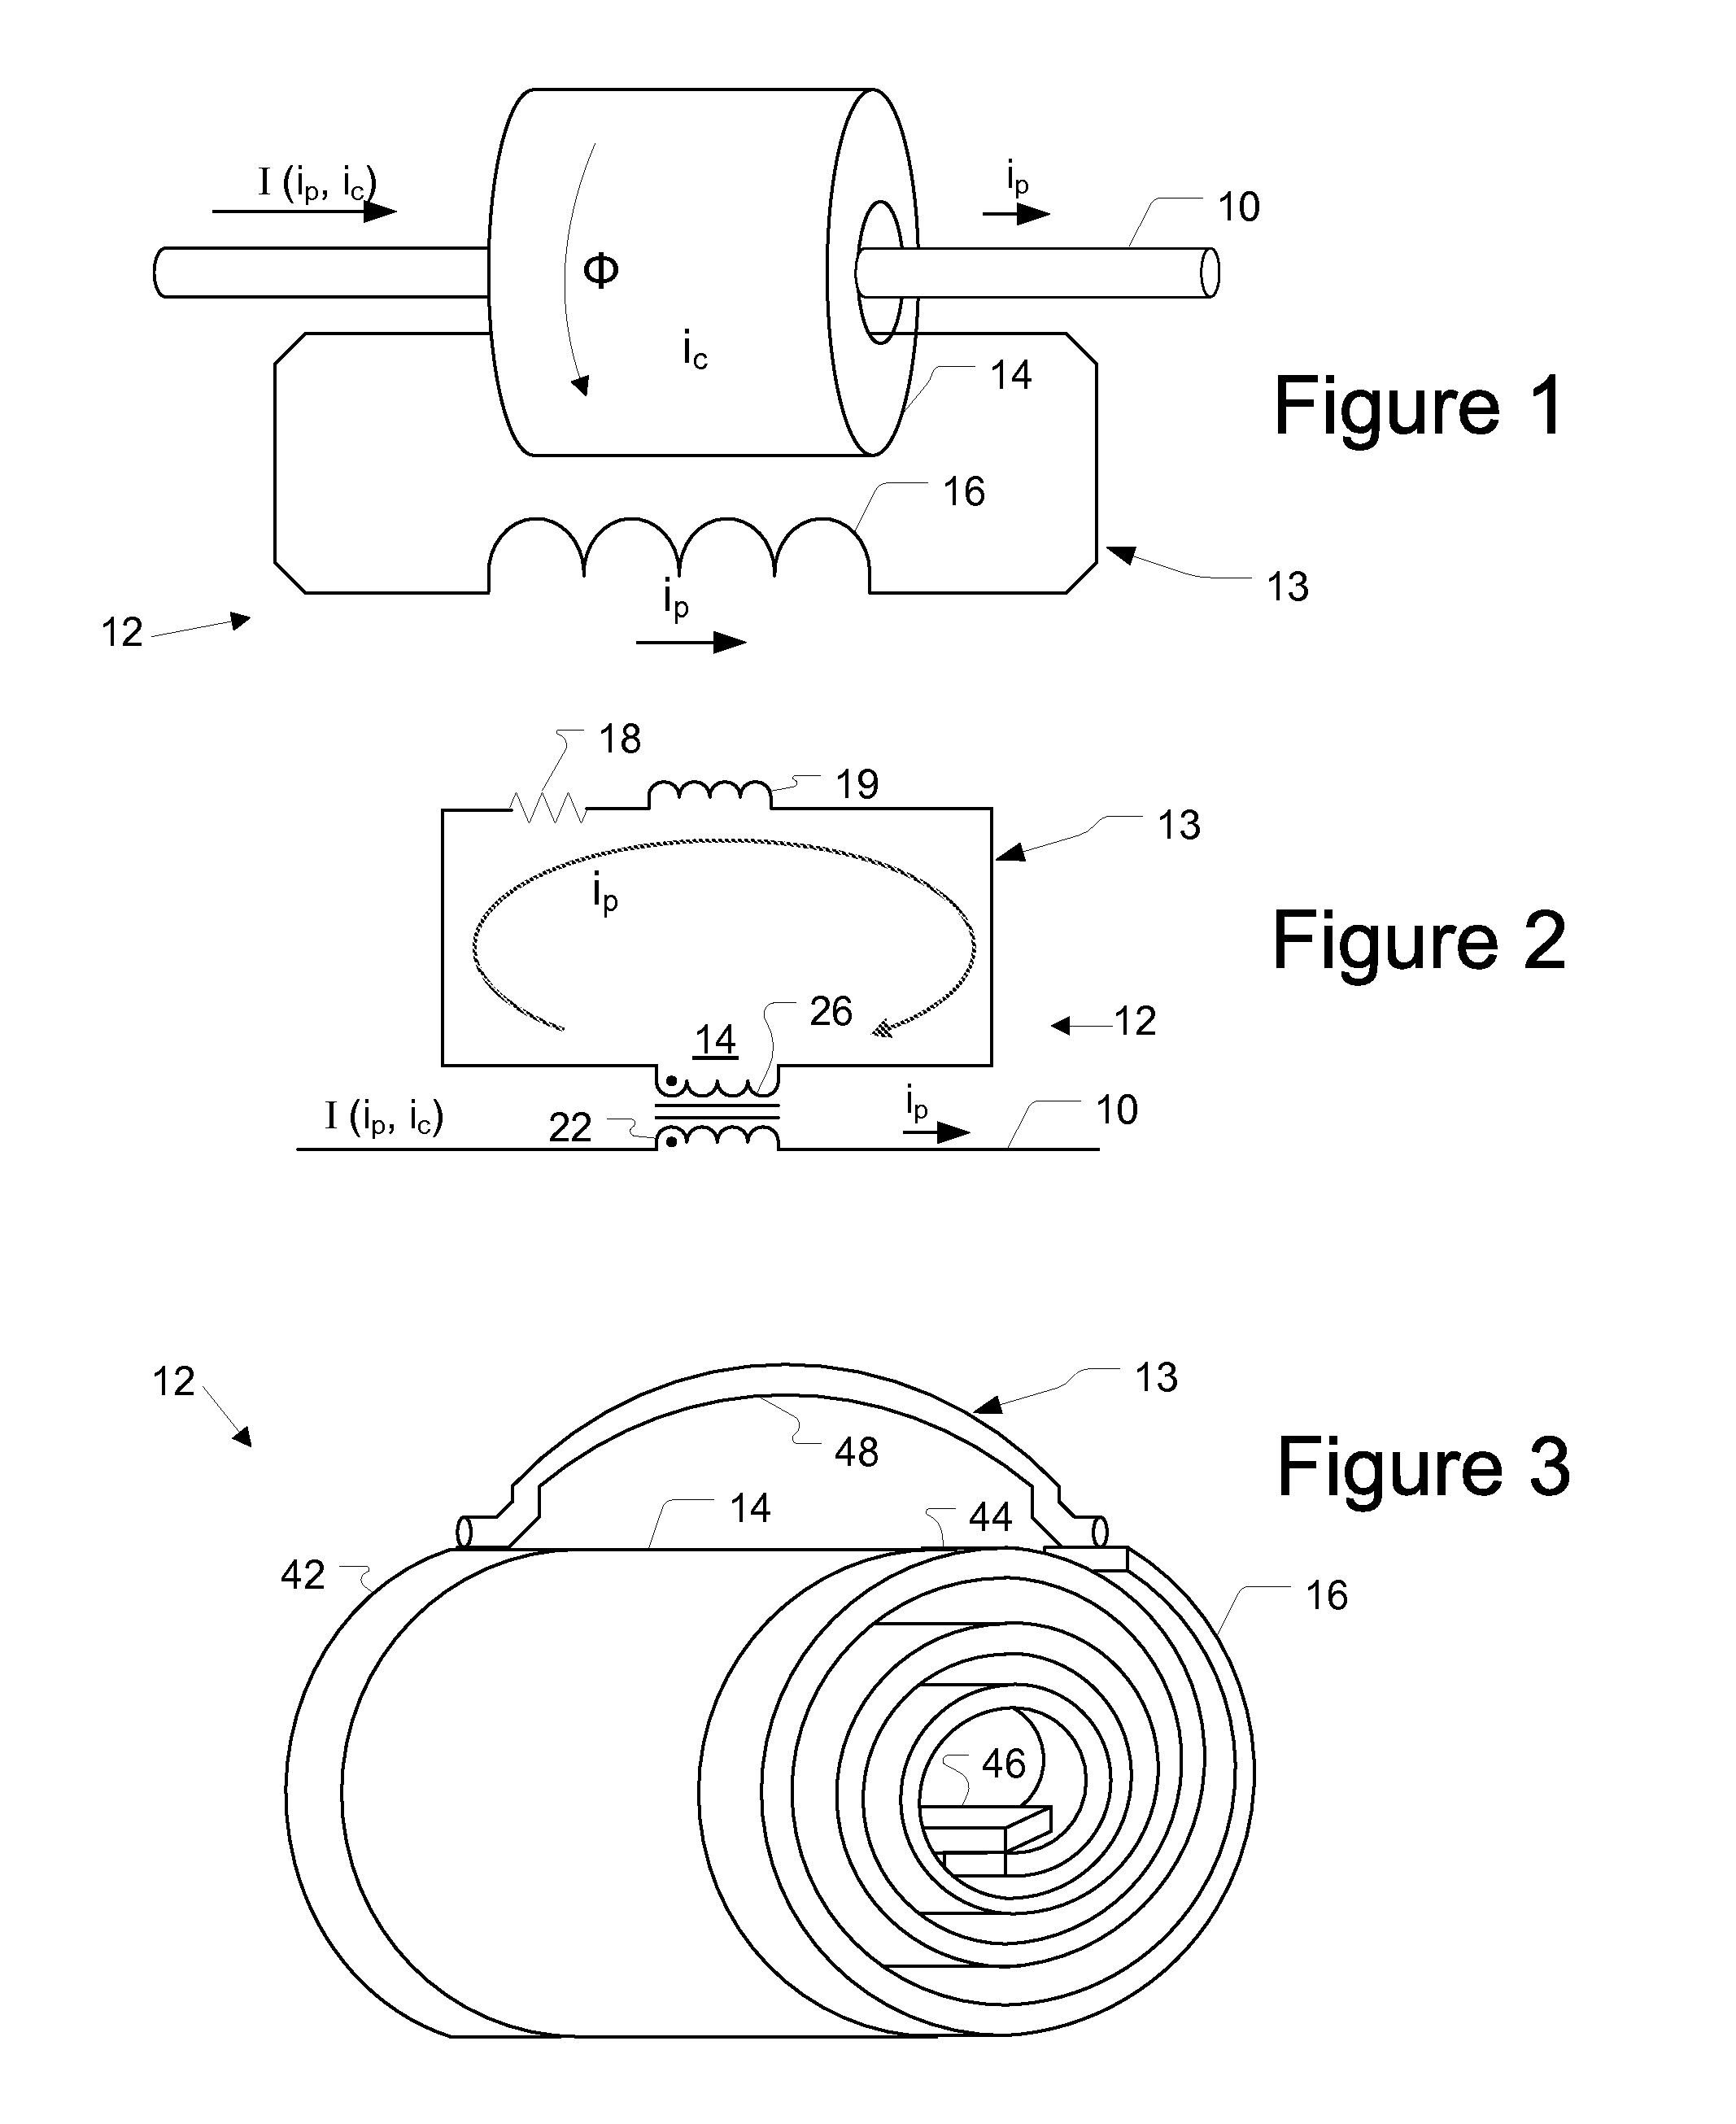 Power Line Data Signal Attenuation Device and Method